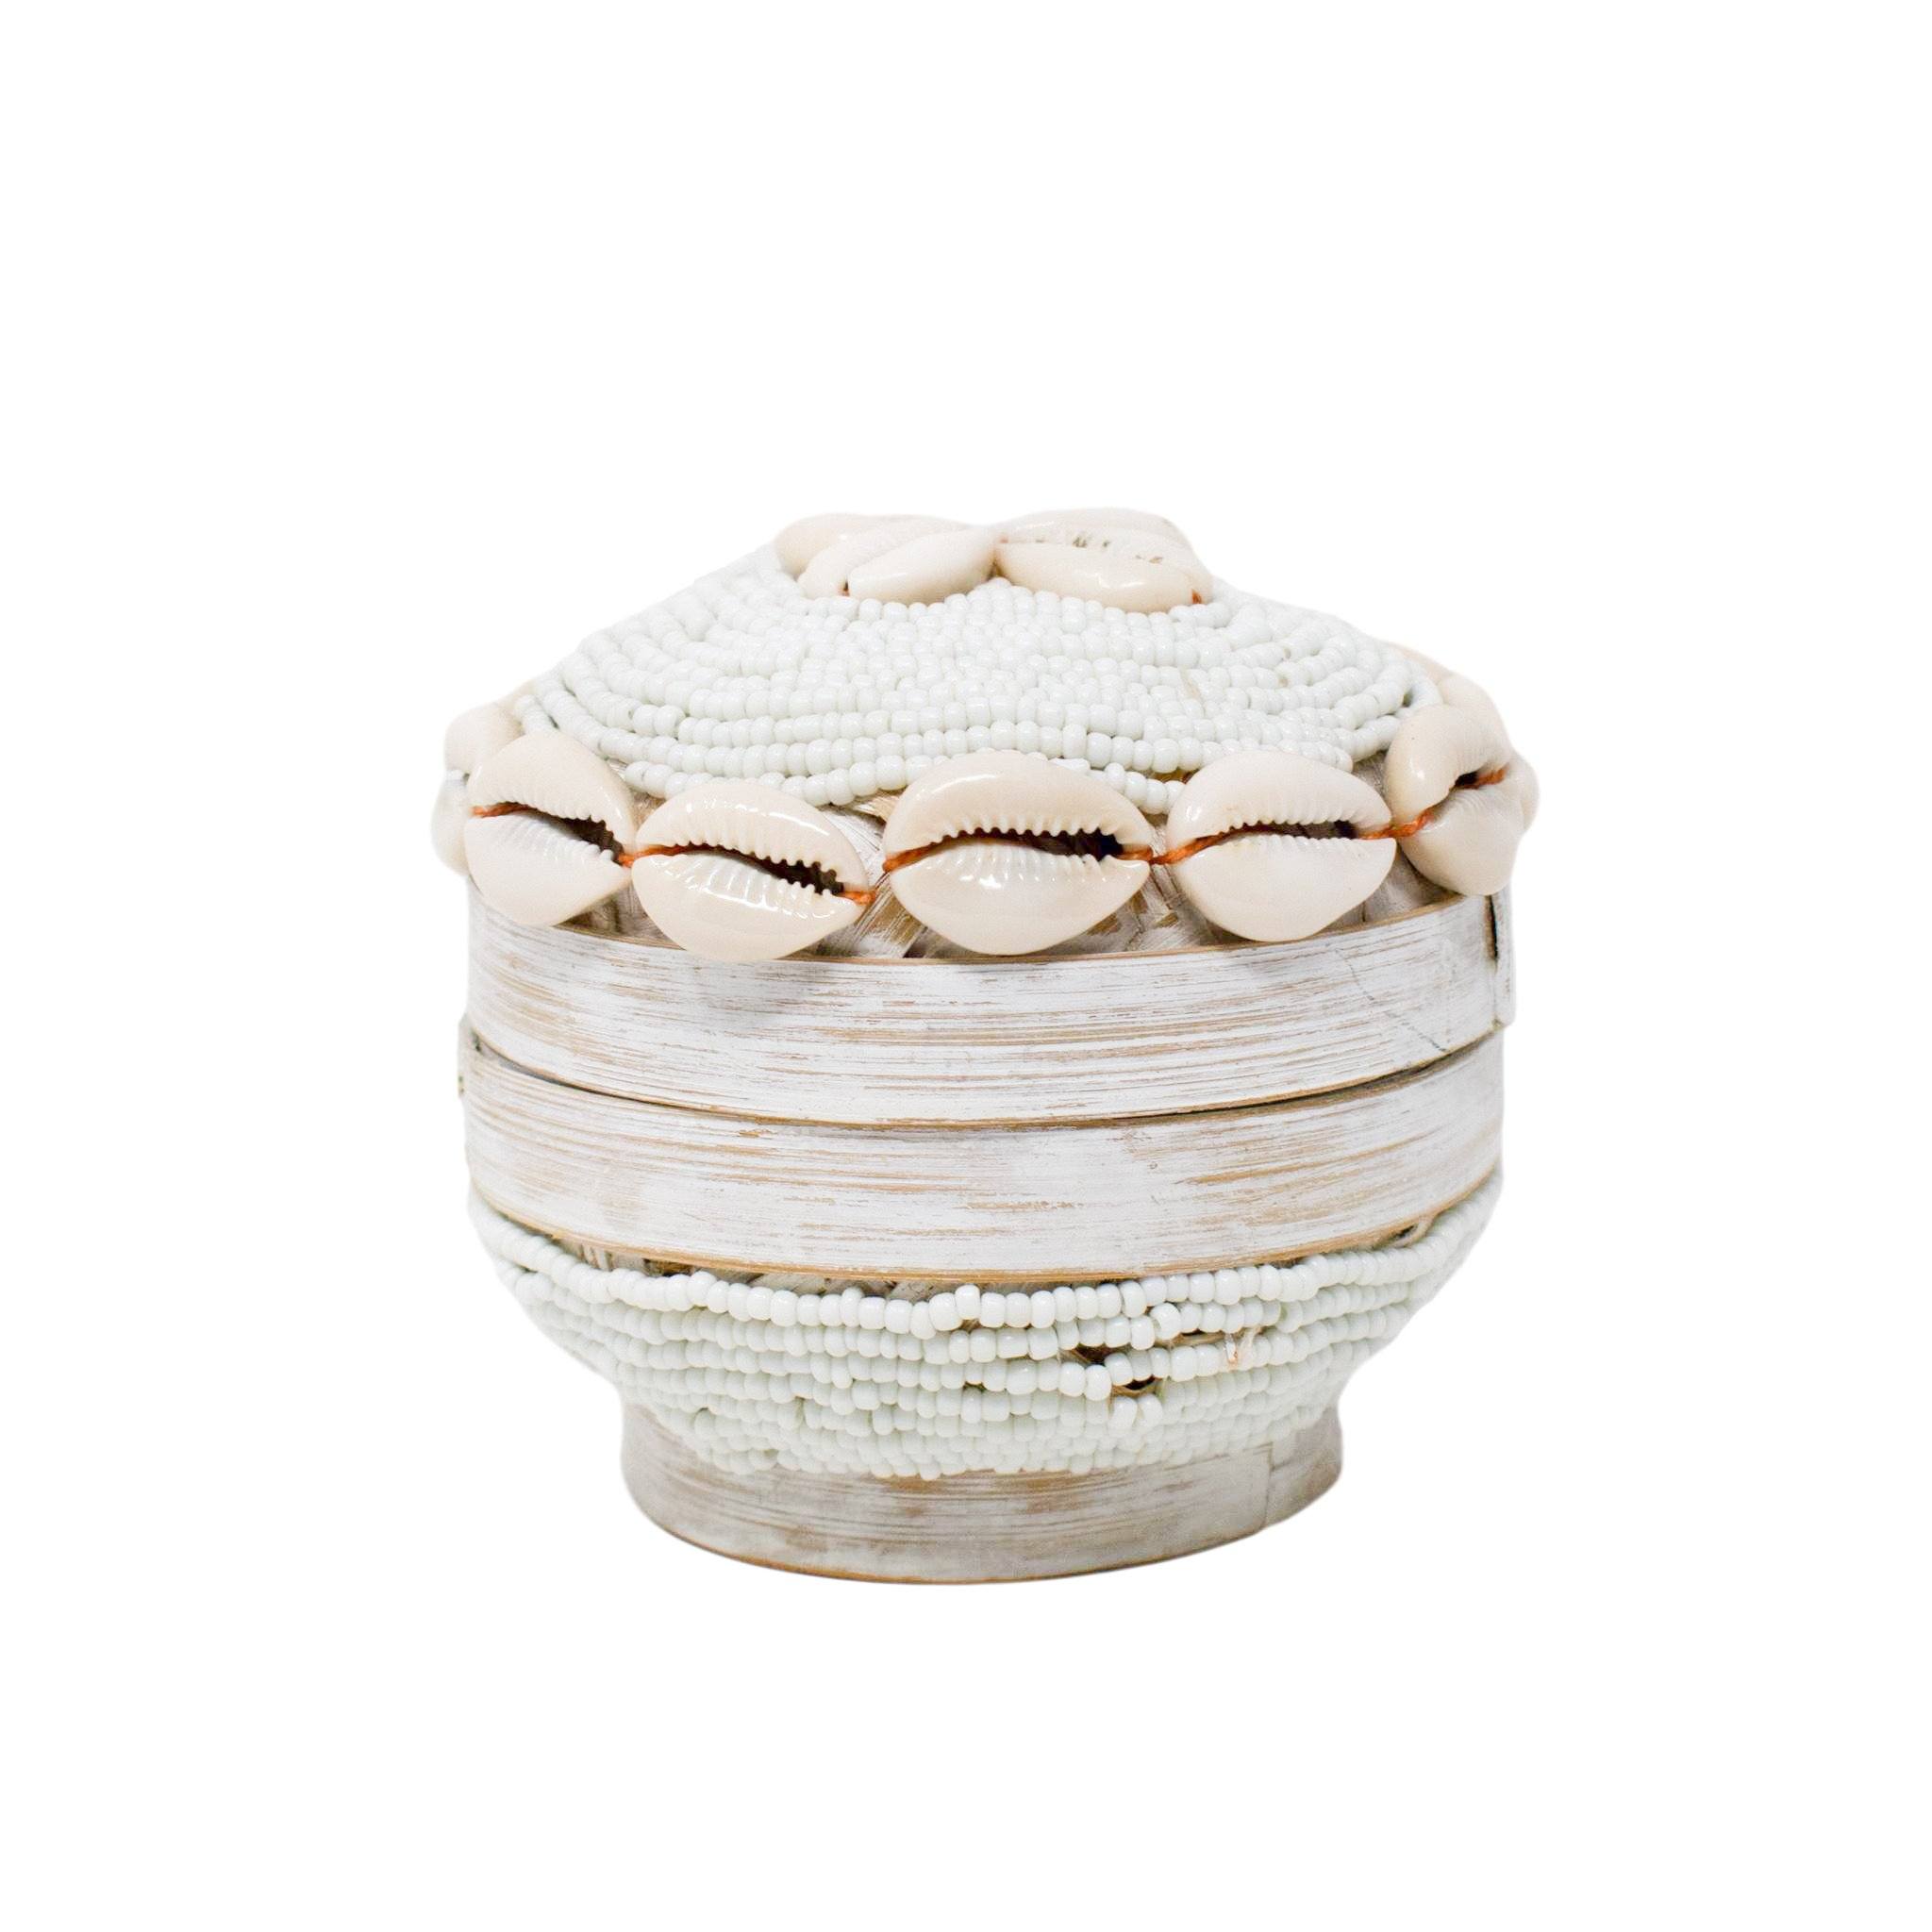  Gili Shell Bowl with Lid - White by POPPY + SAGE POPPY + SAGE Perfumarie